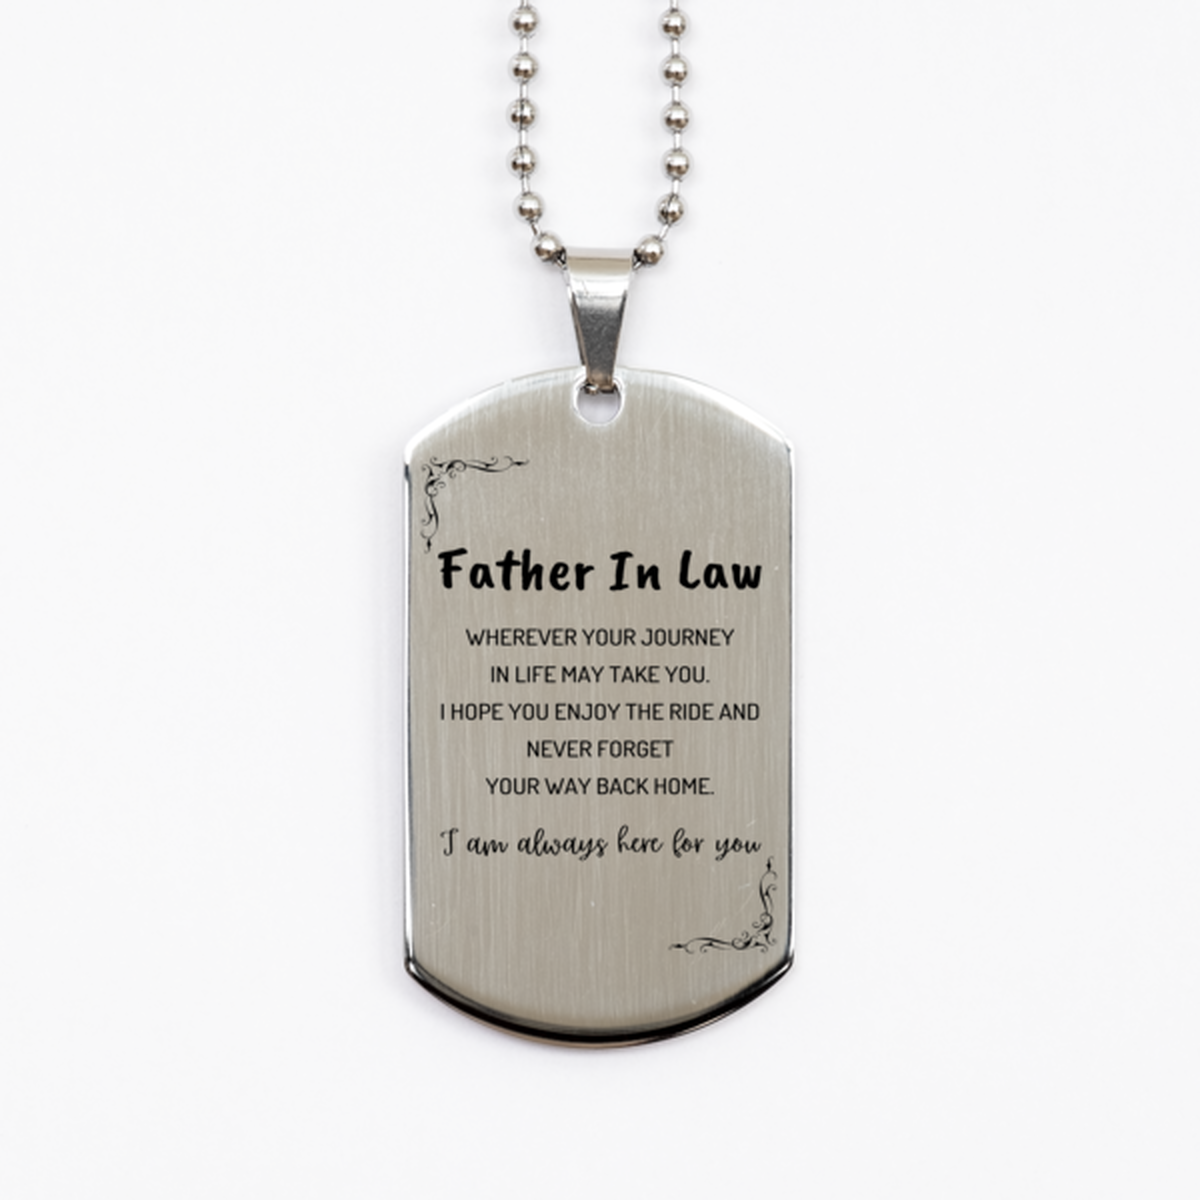 Father In Law wherever your journey in life may take you, I am always here for you Father In Law Silver Dog Tag, Awesome Christmas Gifts For Father In Law, Father In Law Birthday Gifts for Men Women Family Loved One